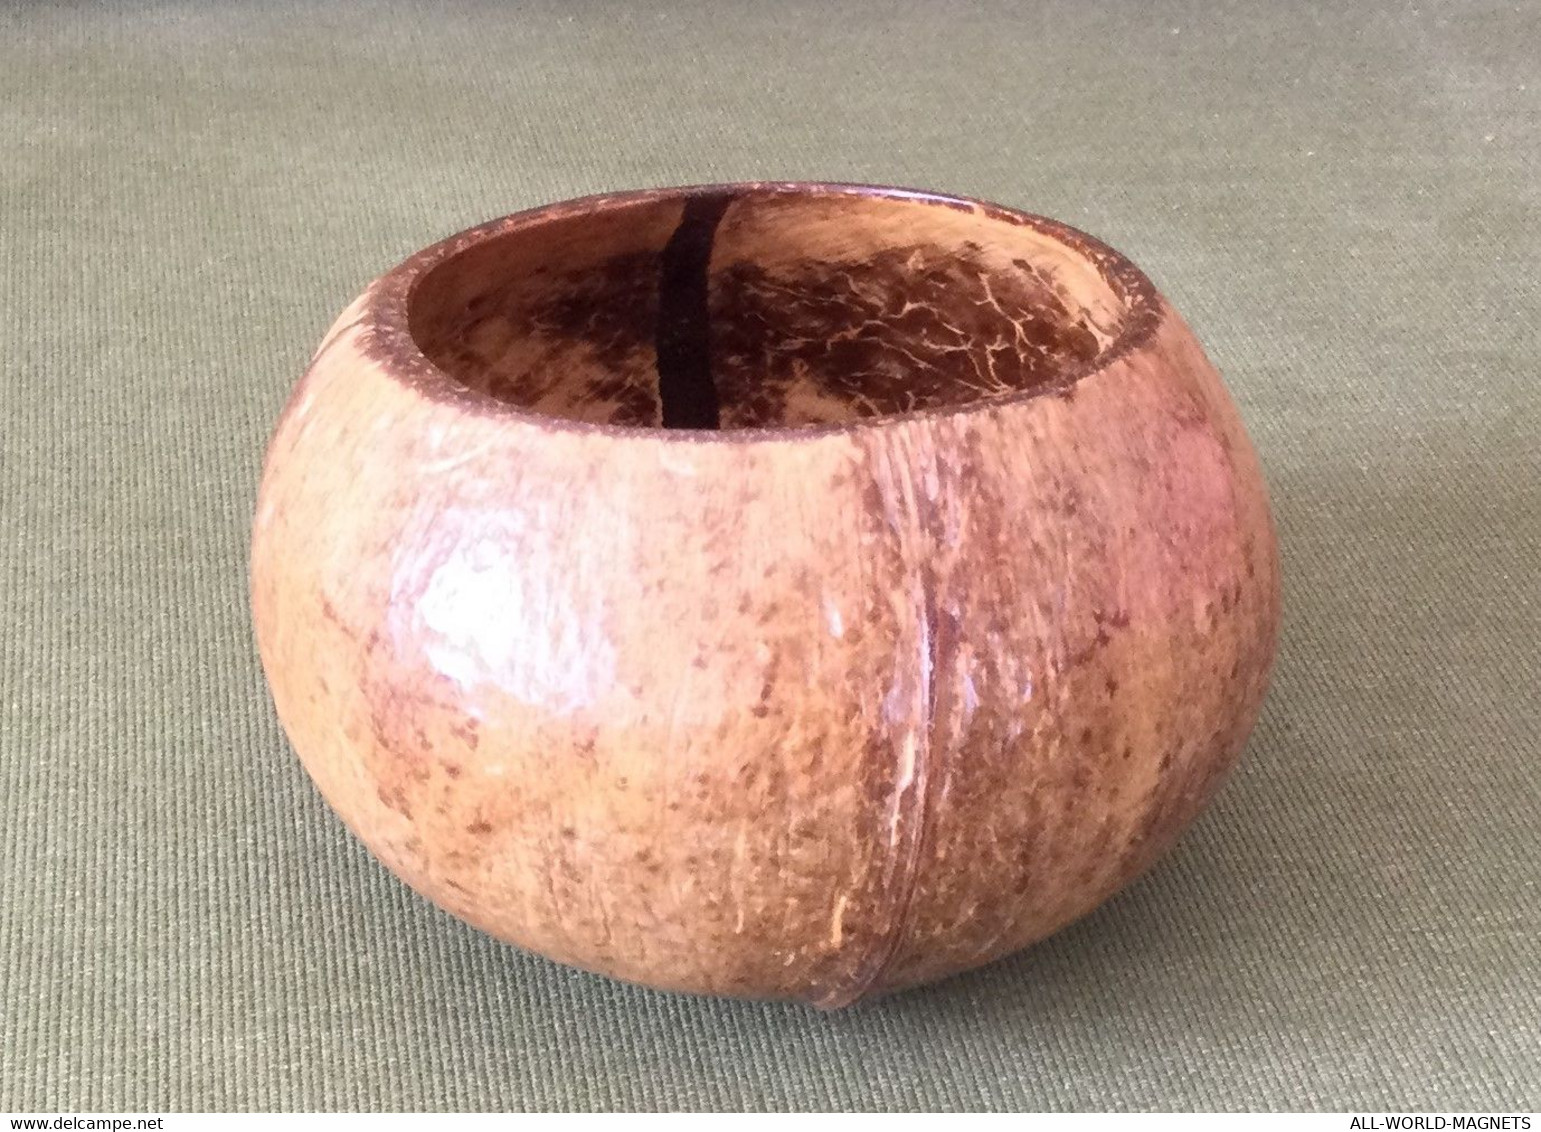 Handmade Decorative Coconut Bowl From Seychelles - Dishes